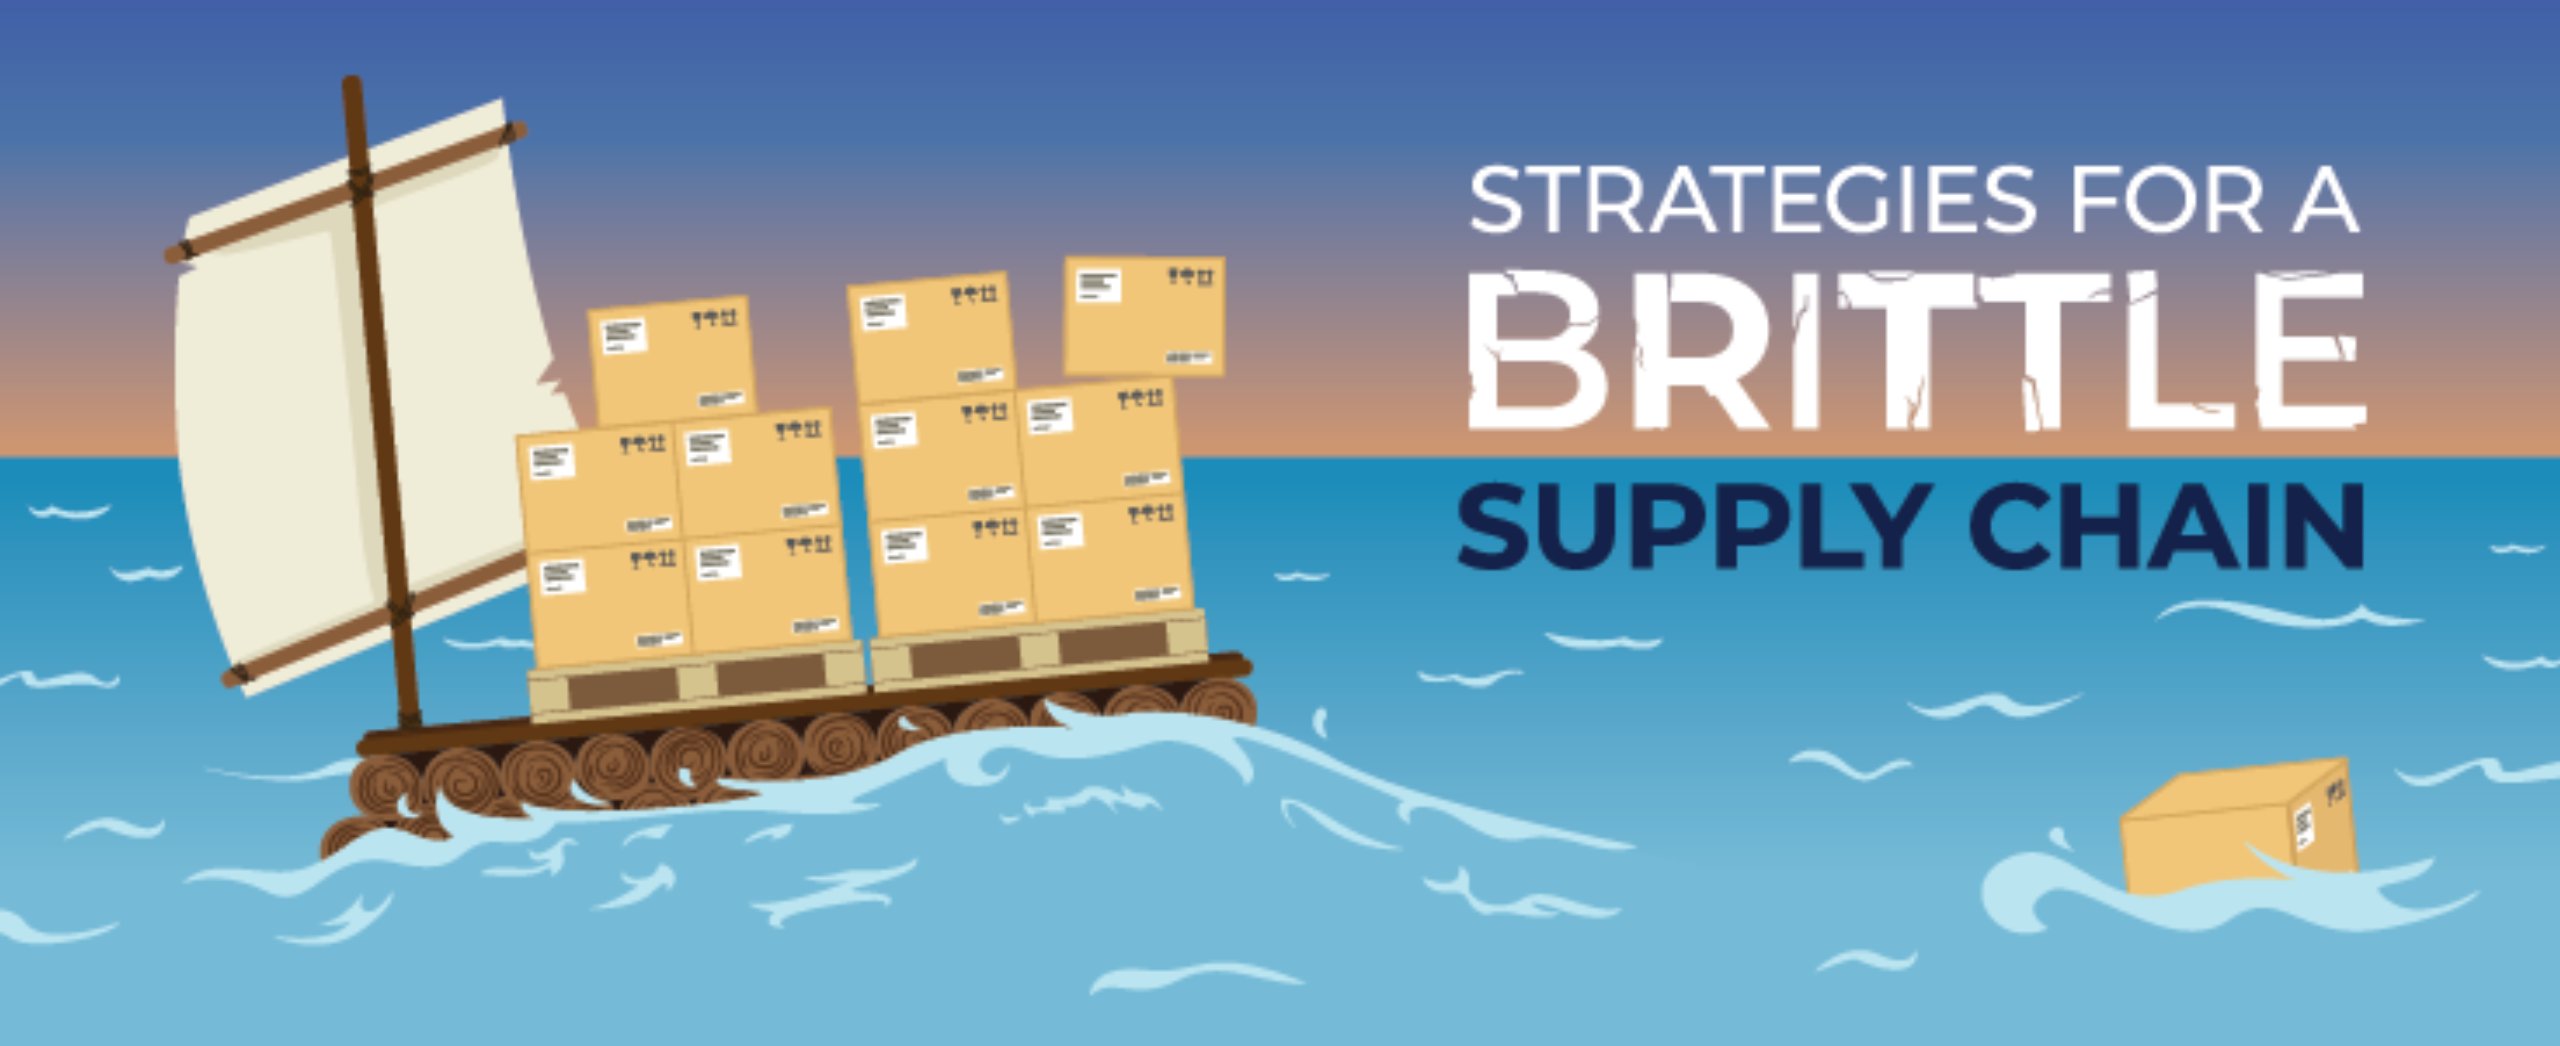 Strategies for a brittle supply chain